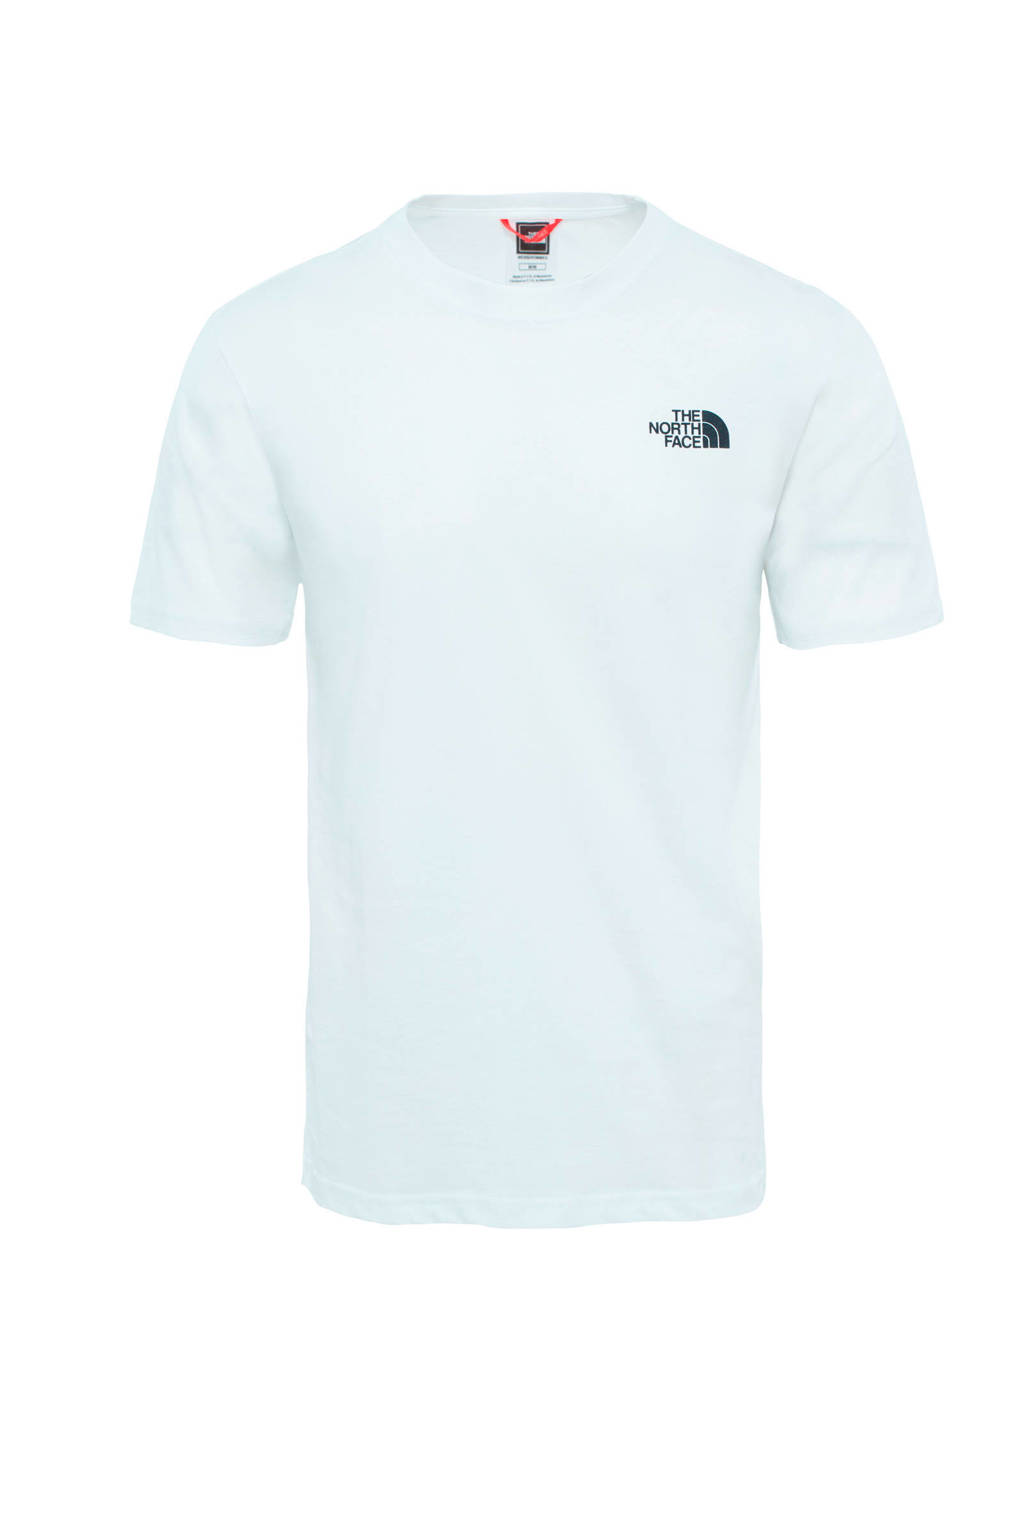 The North Face T-shirt Redbox wit/rood, Wit/rood